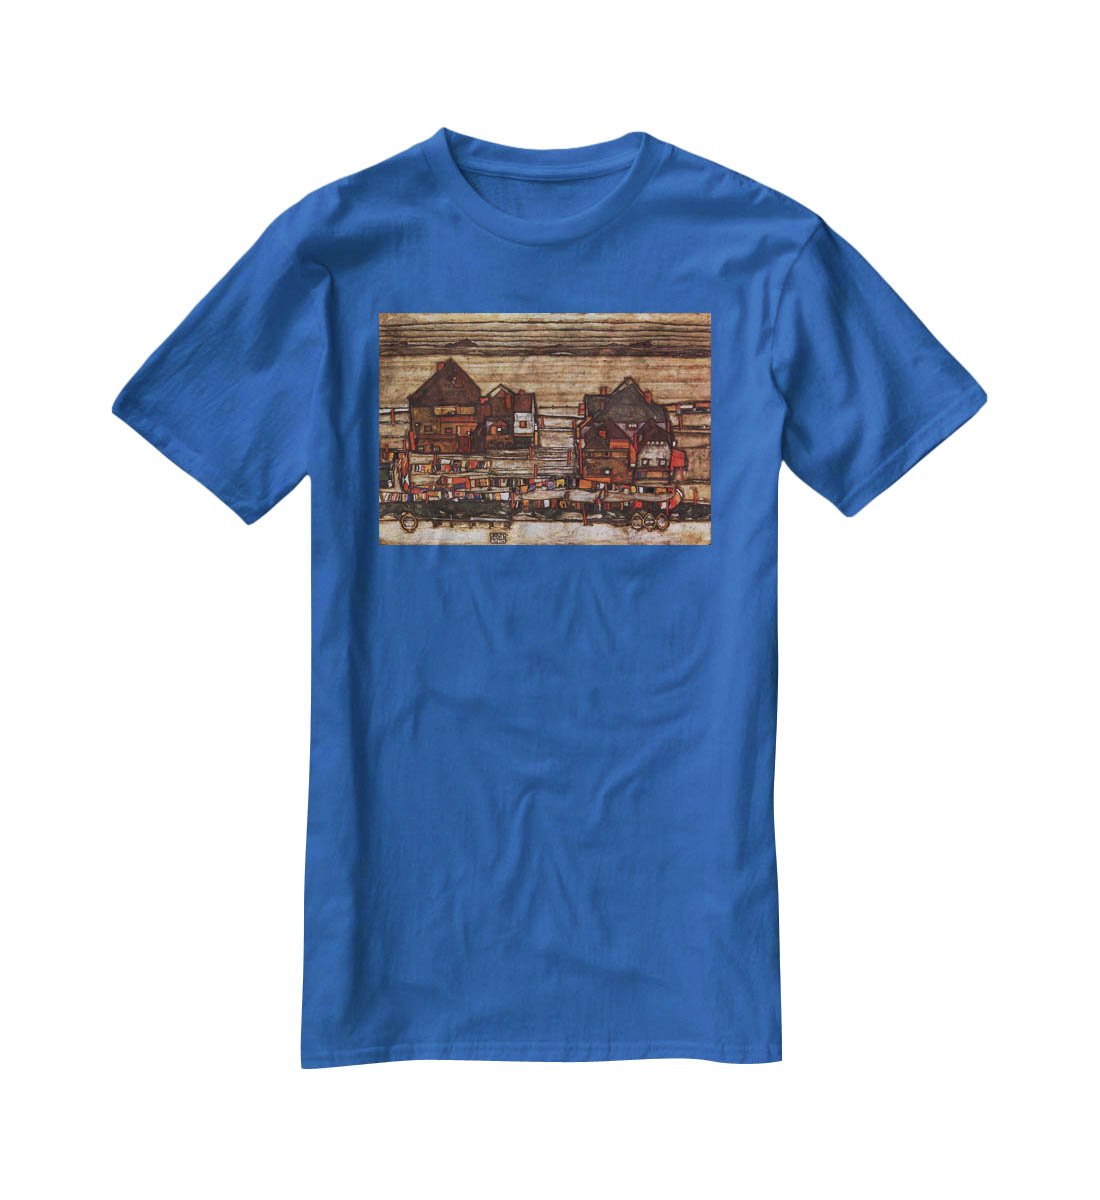 Houses with laundry lines and suburban by Egon Schiele T-Shirt - Canvas Art Rocks - 2